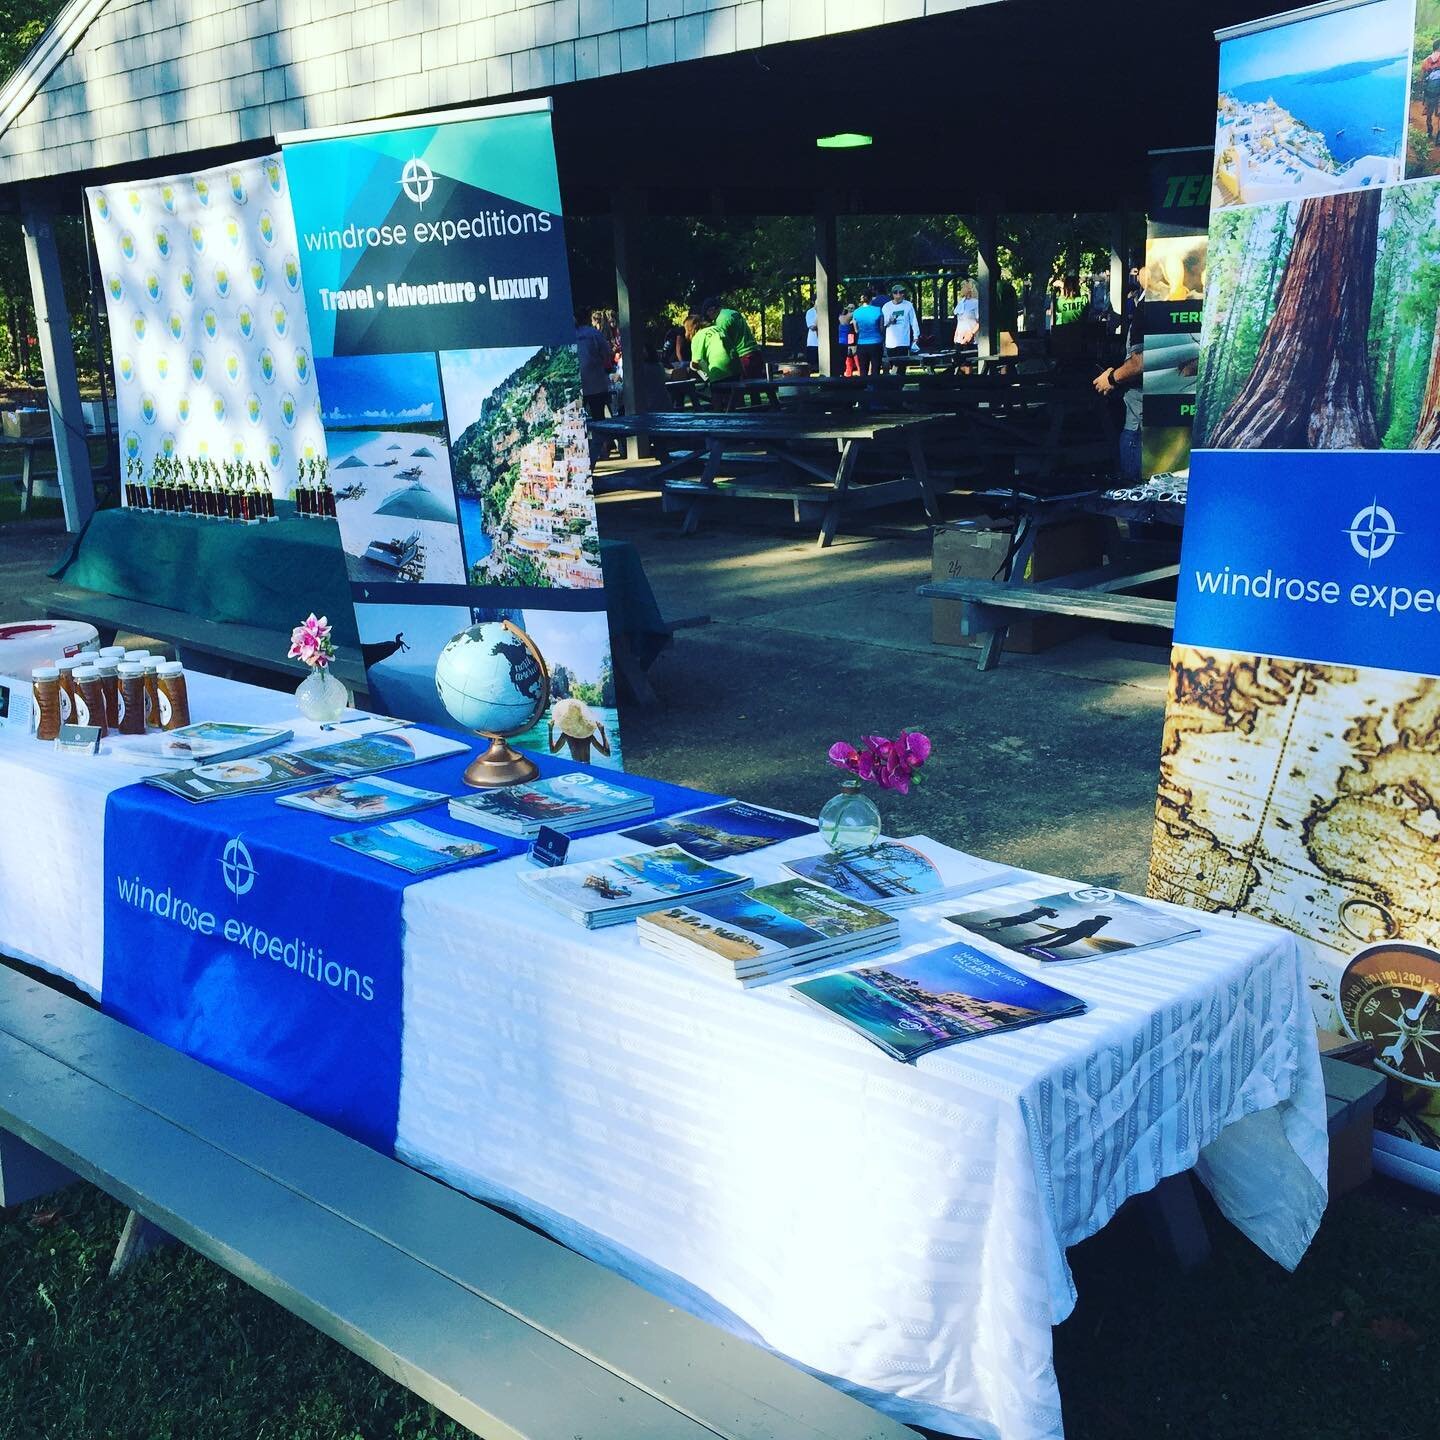 We are all set up at the #bristolwarreneducationfoundation #foodtruck5k Come support a great cause, learn about travel and enjoy free honey tastings from #littlewhitebarnapiary
Contact me:
Mtroia@windroseexpeditions.com
508-514-0251
www.windroseexped